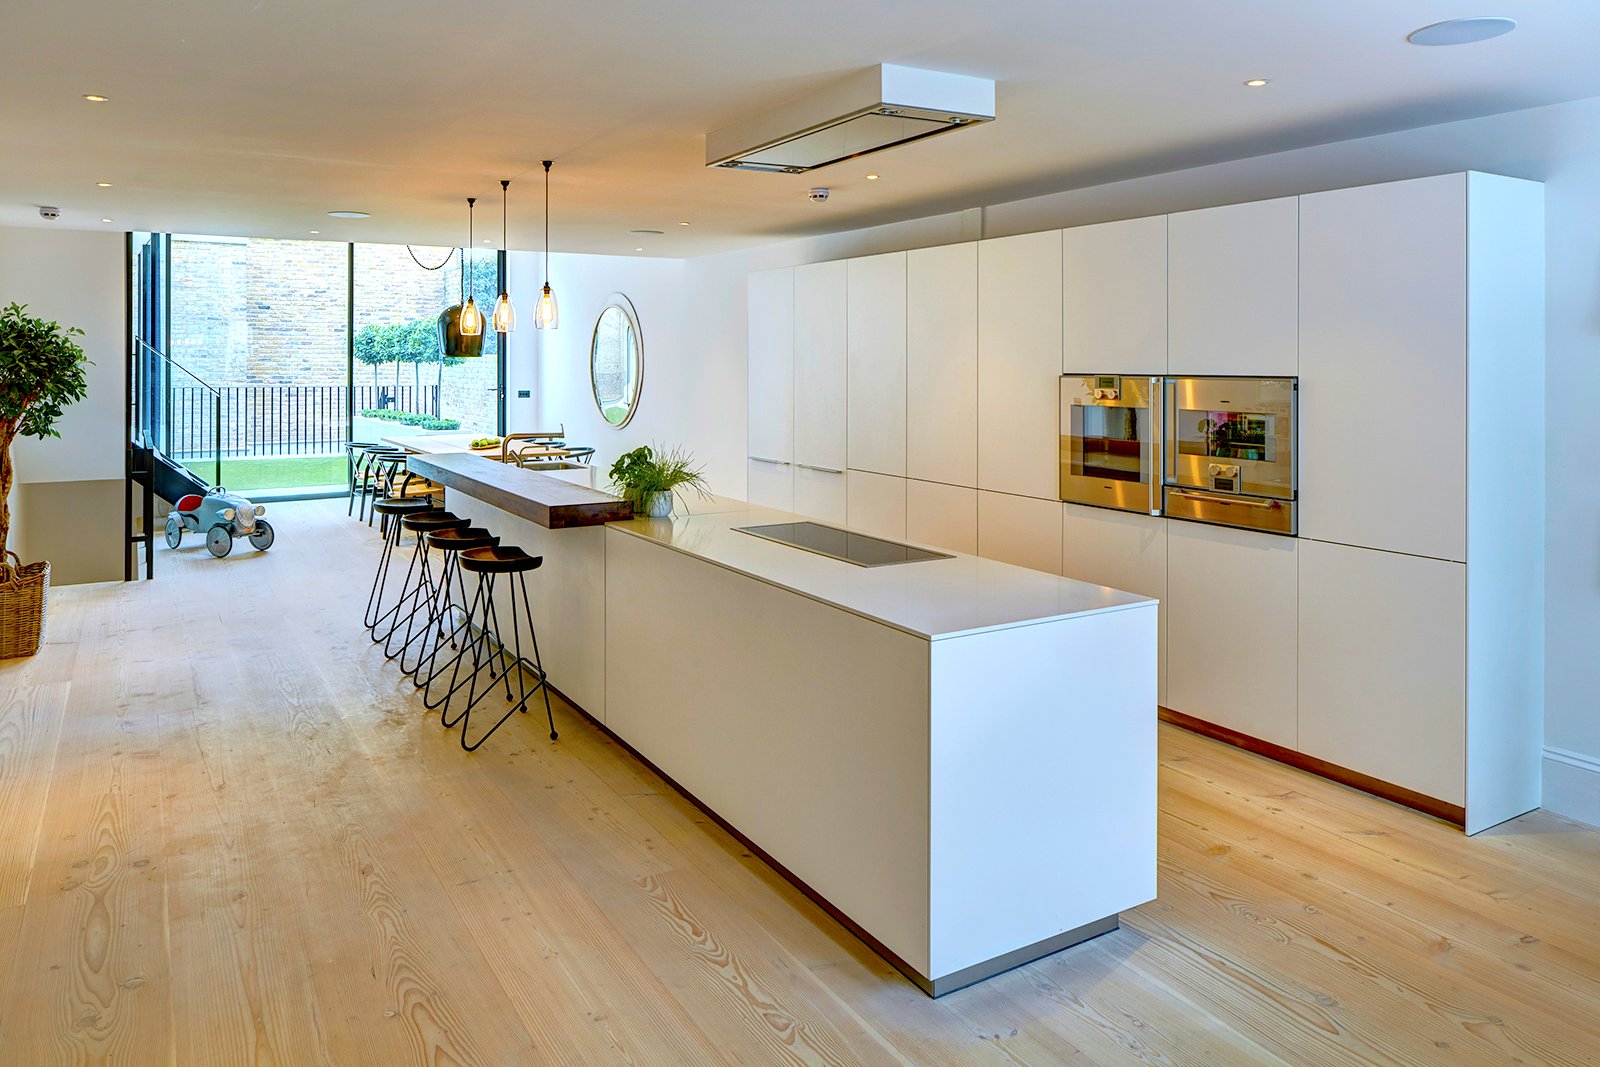 8 Key Considerations When Designing a Kitchen Island